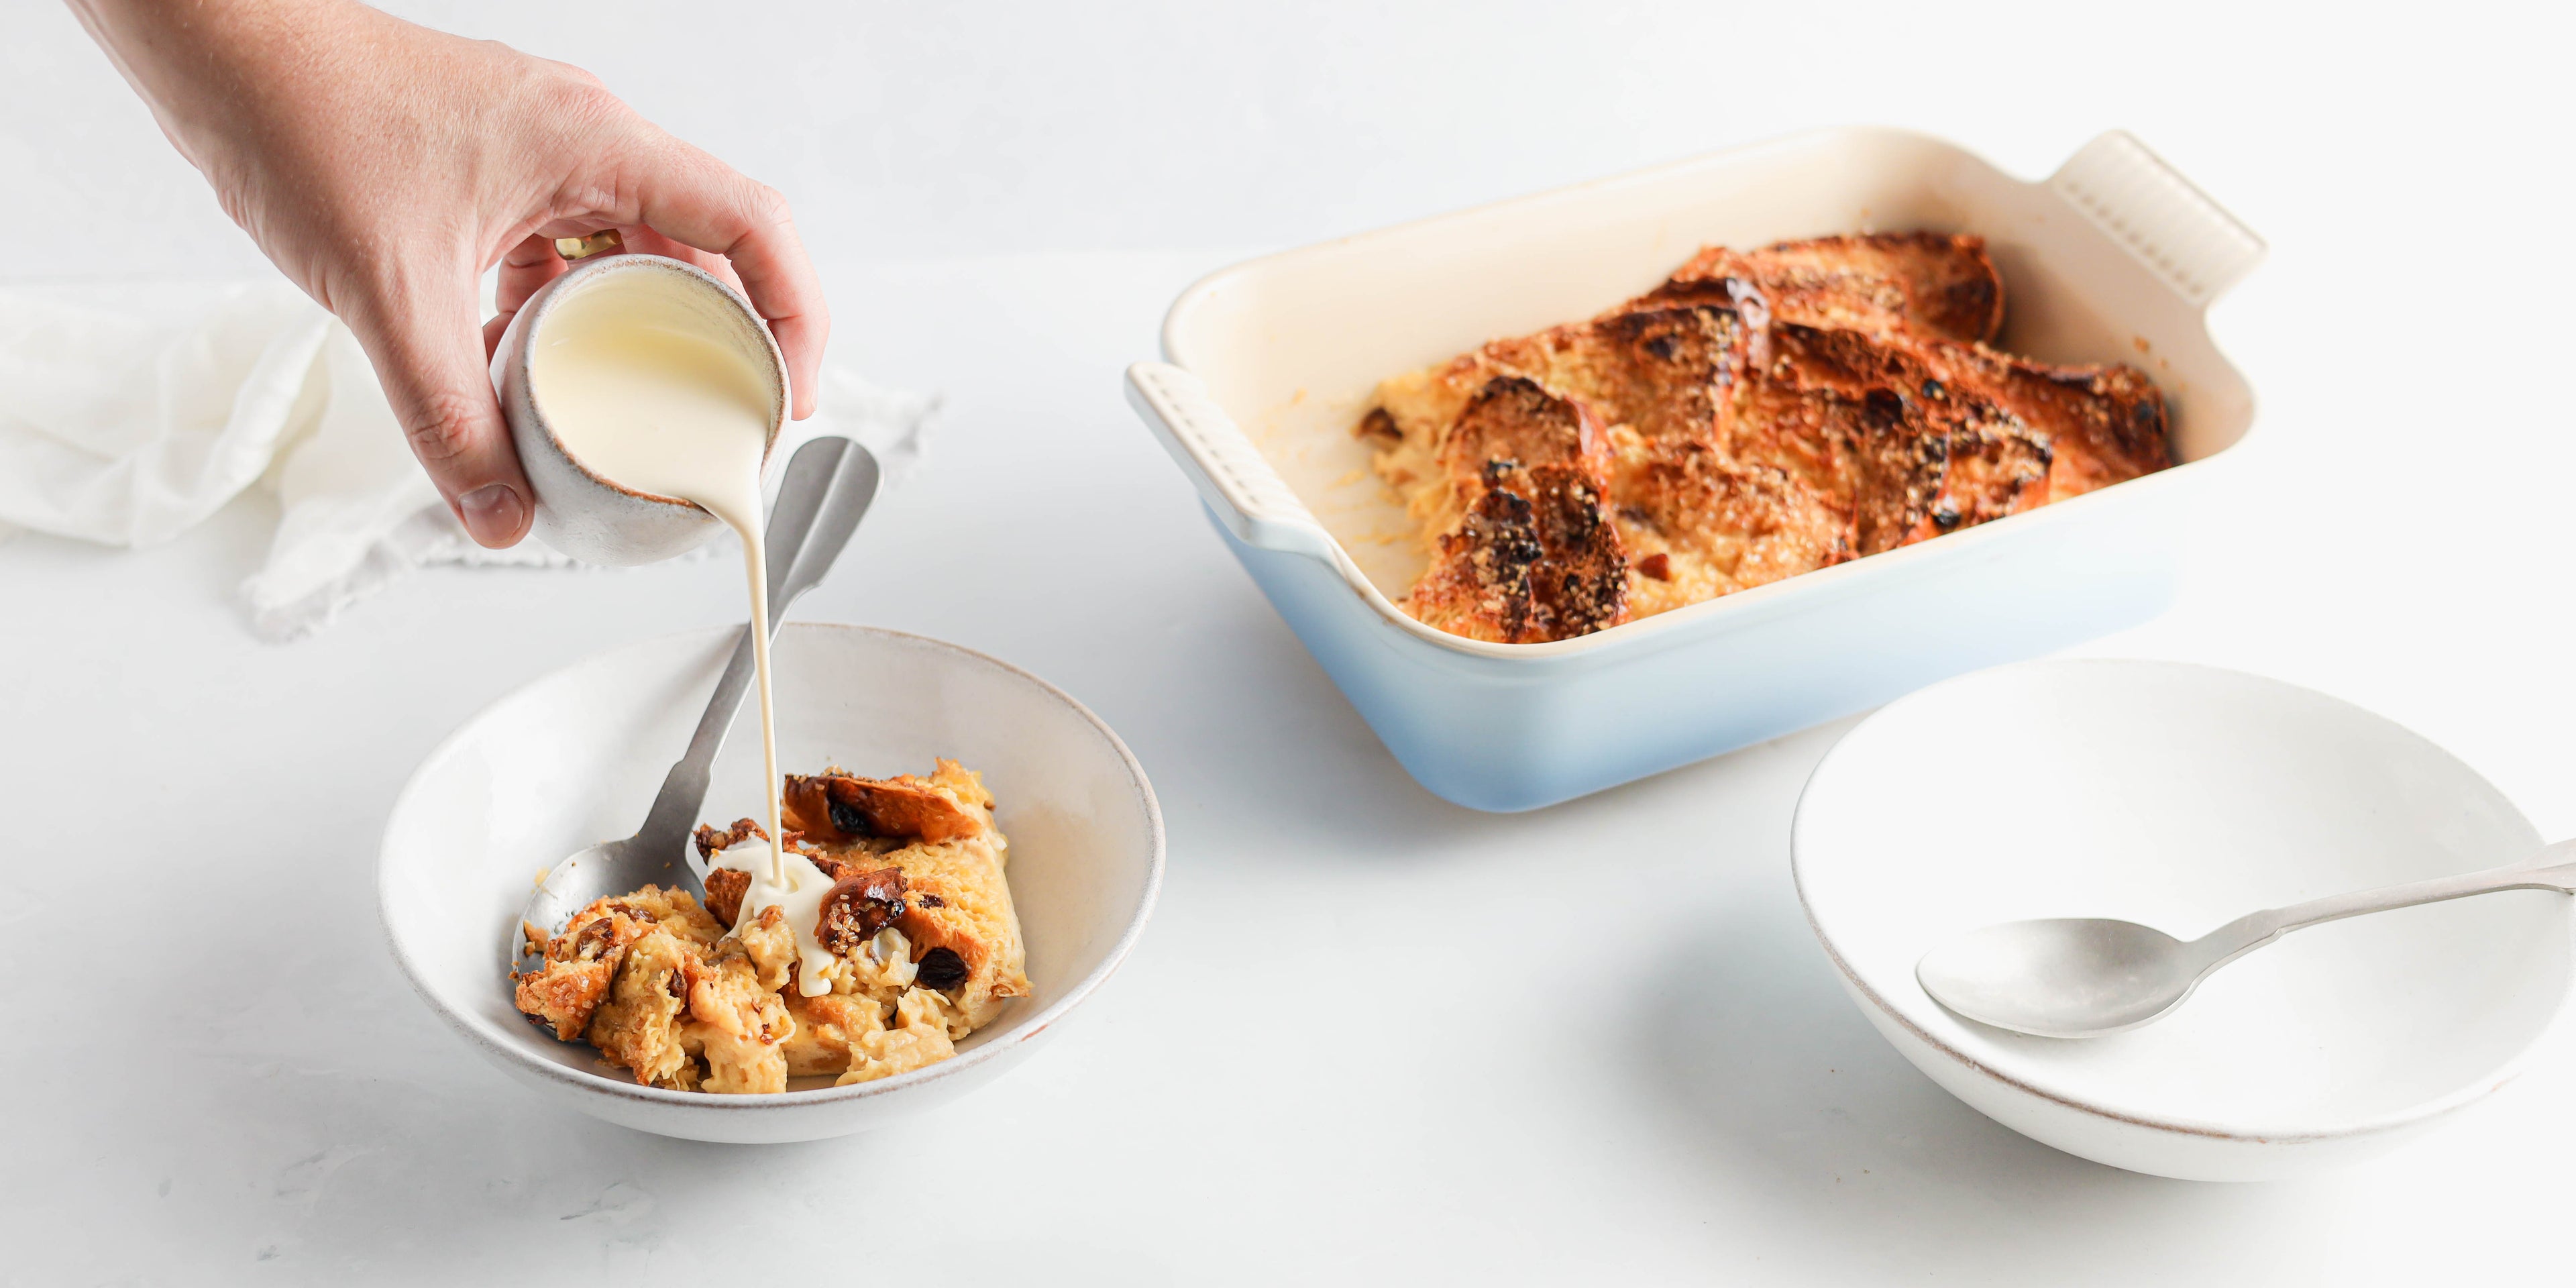 Panettone Bread & Butter Pudding in a bowl being poured with cream by a hand hold a cream jug